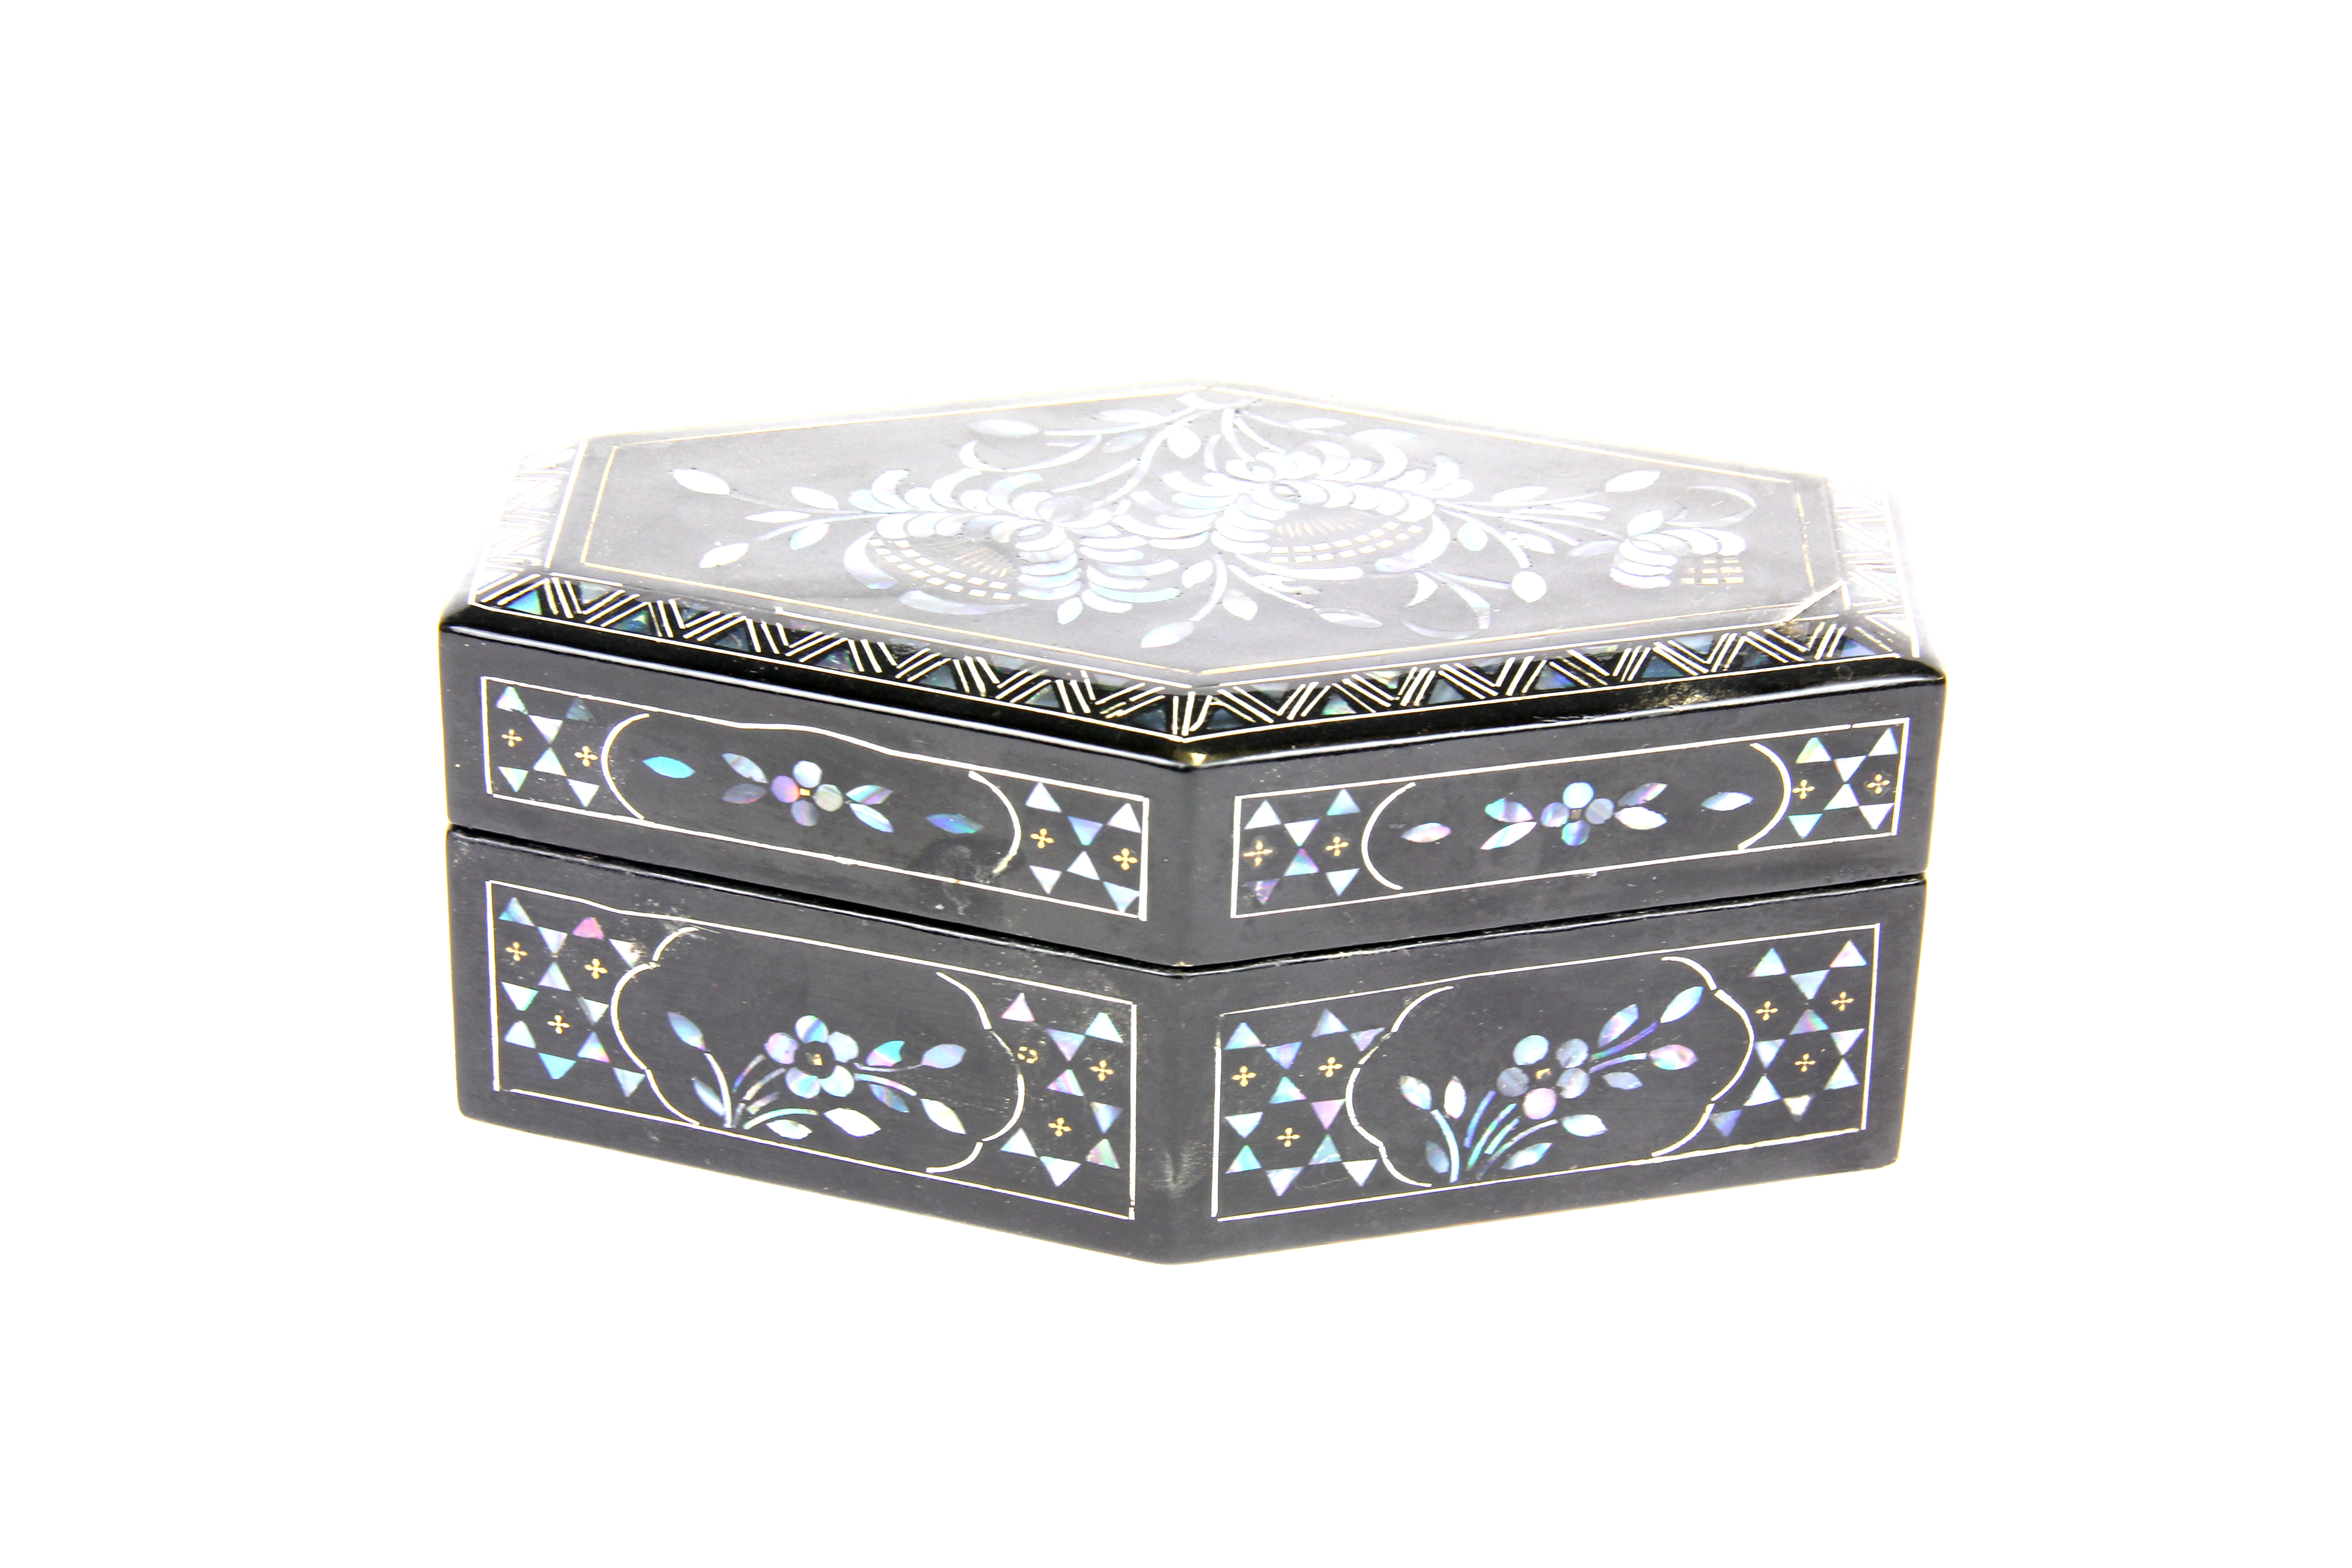 A Chinese lacquer box with Mother of Pearl decoration, L. 13cm. H. 5.5cm. - Image 3 of 4